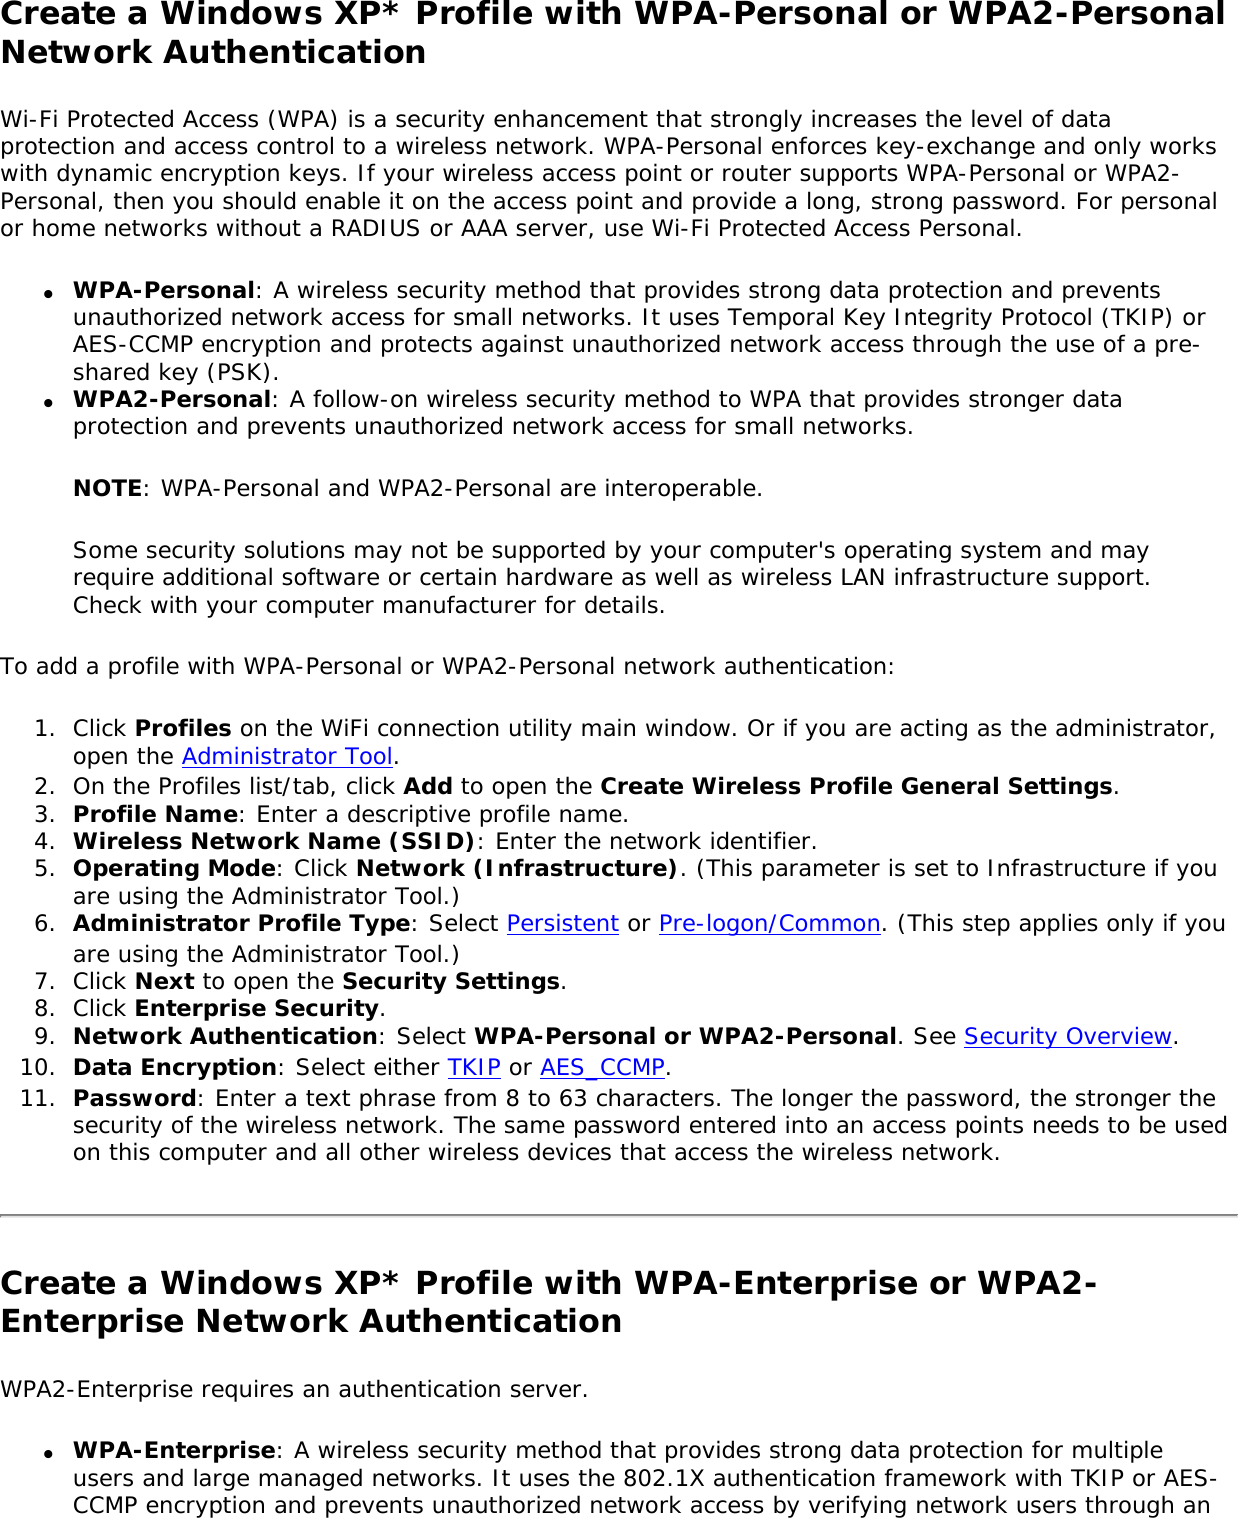 Create a Windows XP* Profile with WPA-Personal or WPA2-Personal Network AuthenticationWi-Fi Protected Access (WPA) is a security enhancement that strongly increases the level of data protection and access control to a wireless network. WPA-Personal enforces key-exchange and only works with dynamic encryption keys. If your wireless access point or router supports WPA-Personal or WPA2-Personal, then you should enable it on the access point and provide a long, strong password. For personal or home networks without a RADIUS or AAA server, use Wi-Fi Protected Access Personal.●     WPA-Personal: A wireless security method that provides strong data protection and prevents unauthorized network access for small networks. It uses Temporal Key Integrity Protocol (TKIP) or AES-CCMP encryption and protects against unauthorized network access through the use of a pre-shared key (PSK).●     WPA2-Personal: A follow-on wireless security method to WPA that provides stronger data protection and prevents unauthorized network access for small networks. NOTE: WPA-Personal and WPA2-Personal are interoperable.Some security solutions may not be supported by your computer&apos;s operating system and may require additional software or certain hardware as well as wireless LAN infrastructure support. Check with your computer manufacturer for details.To add a profile with WPA-Personal or WPA2-Personal network authentication: 1.  Click Profiles on the WiFi connection utility main window. Or if you are acting as the administrator, open the Administrator Tool. 2.  On the Profiles list/tab, click Add to open the Create Wireless Profile General Settings.3.  Profile Name: Enter a descriptive profile name.4.  Wireless Network Name (SSID): Enter the network identifier.5.  Operating Mode: Click Network (Infrastructure). (This parameter is set to Infrastructure if you are using the Administrator Tool.)6.  Administrator Profile Type: Select Persistent or Pre-logon/Common. (This step applies only if you are using the Administrator Tool.)7.  Click Next to open the Security Settings.8.  Click Enterprise Security.9.  Network Authentication: Select WPA-Personal or WPA2-Personal. See Security Overview.10.  Data Encryption: Select either TKIP or AES_CCMP. 11.  Password: Enter a text phrase from 8 to 63 characters. The longer the password, the stronger the security of the wireless network. The same password entered into an access points needs to be used on this computer and all other wireless devices that access the wireless network.Create a Windows XP* Profile with WPA-Enterprise or WPA2-Enterprise Network Authentication WPA2-Enterprise requires an authentication server.●     WPA-Enterprise: A wireless security method that provides strong data protection for multiple users and large managed networks. It uses the 802.1X authentication framework with TKIP or AES-CCMP encryption and prevents unauthorized network access by verifying network users through an 